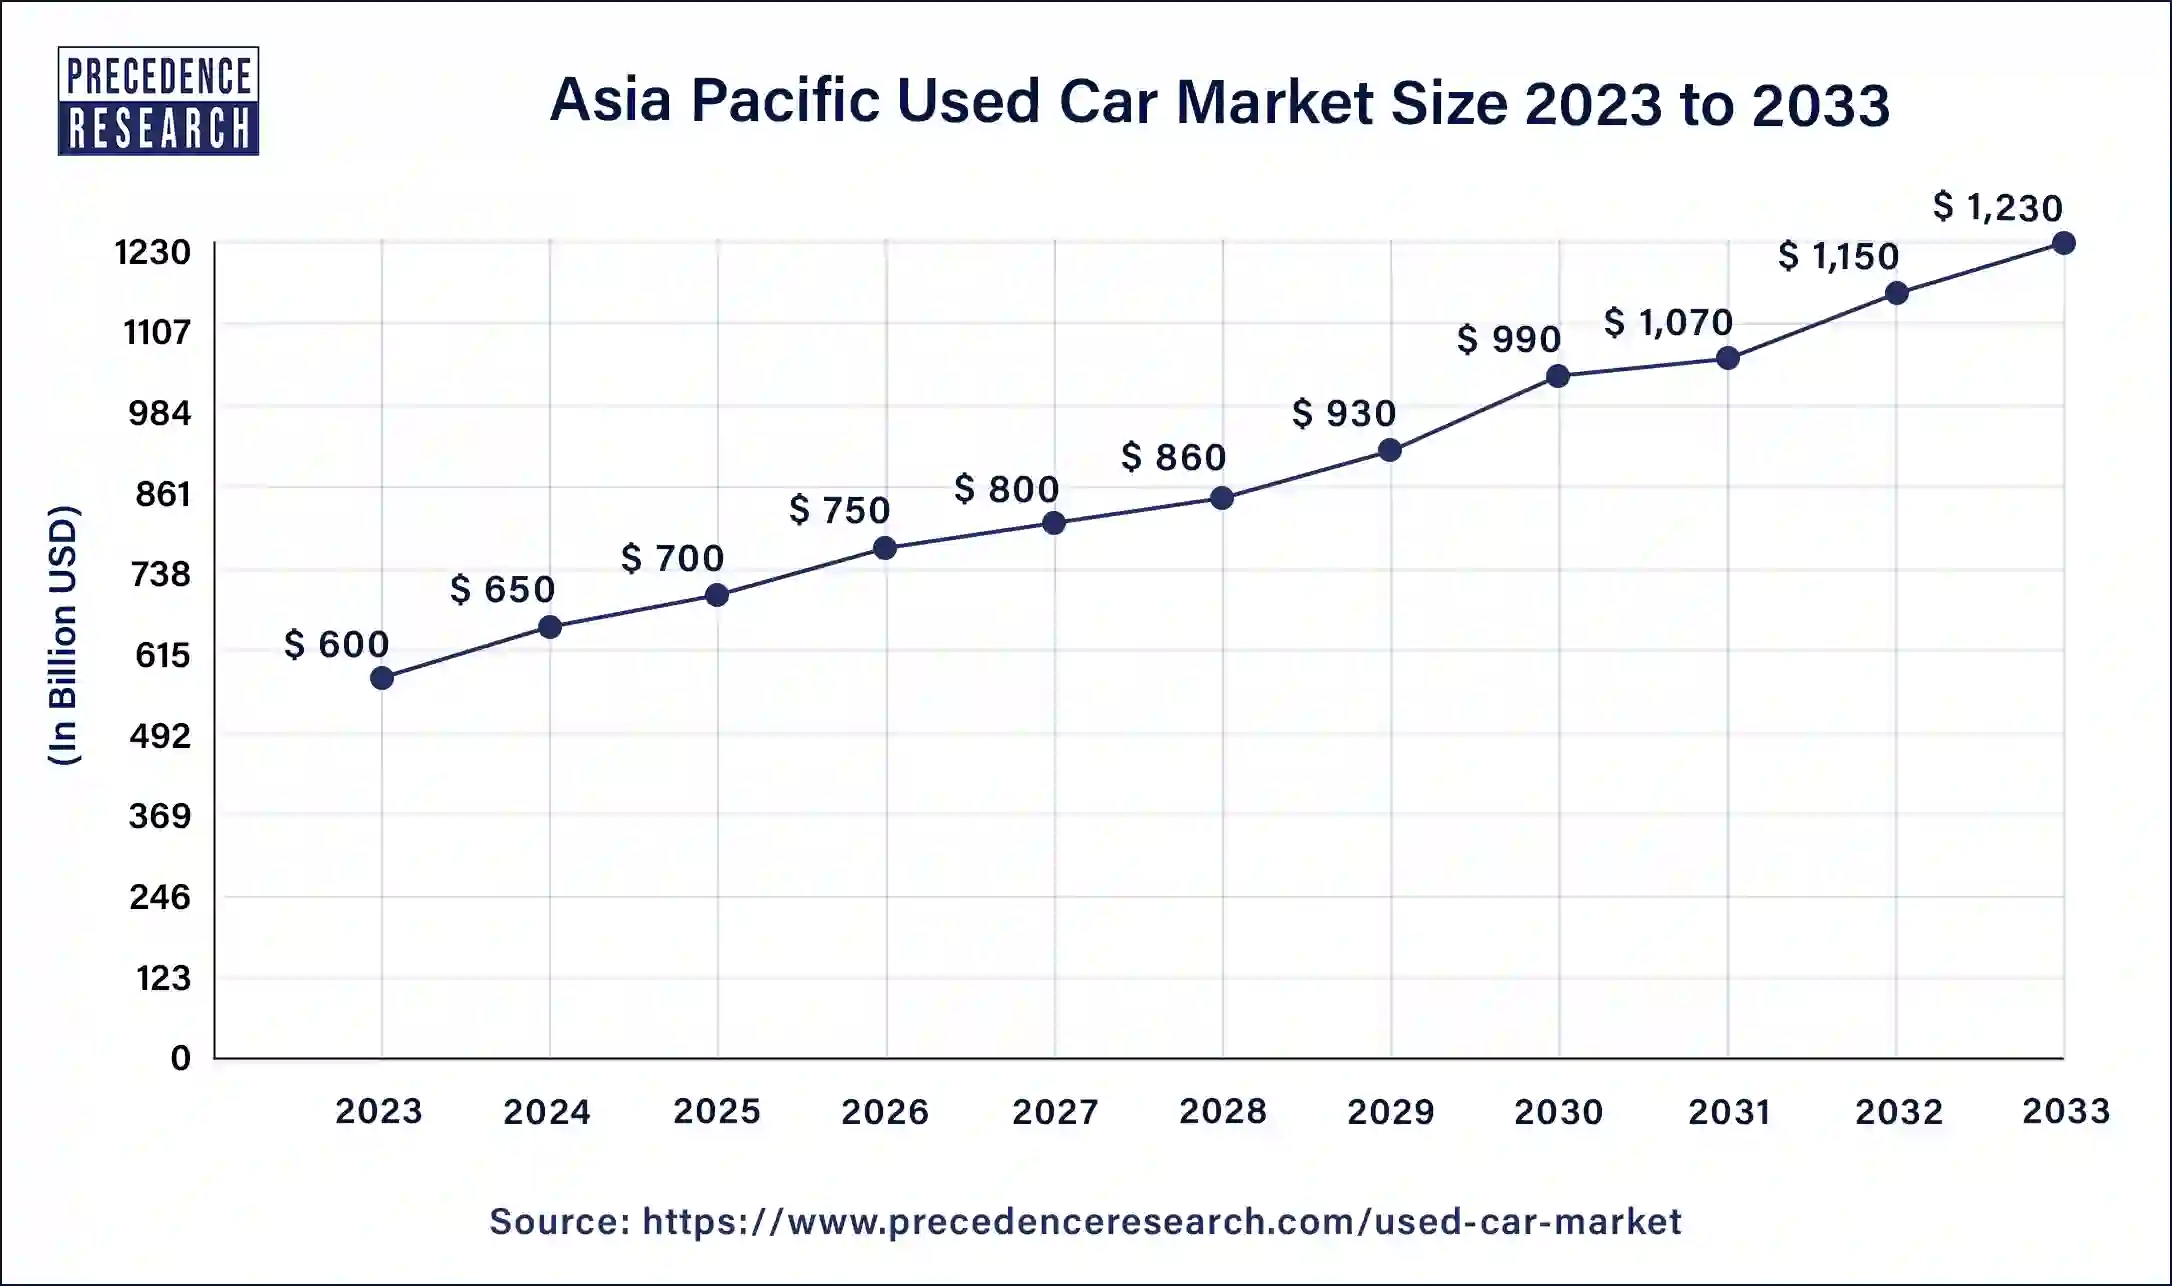 Asia Pacific Used Car Market Size 2024 to 2033